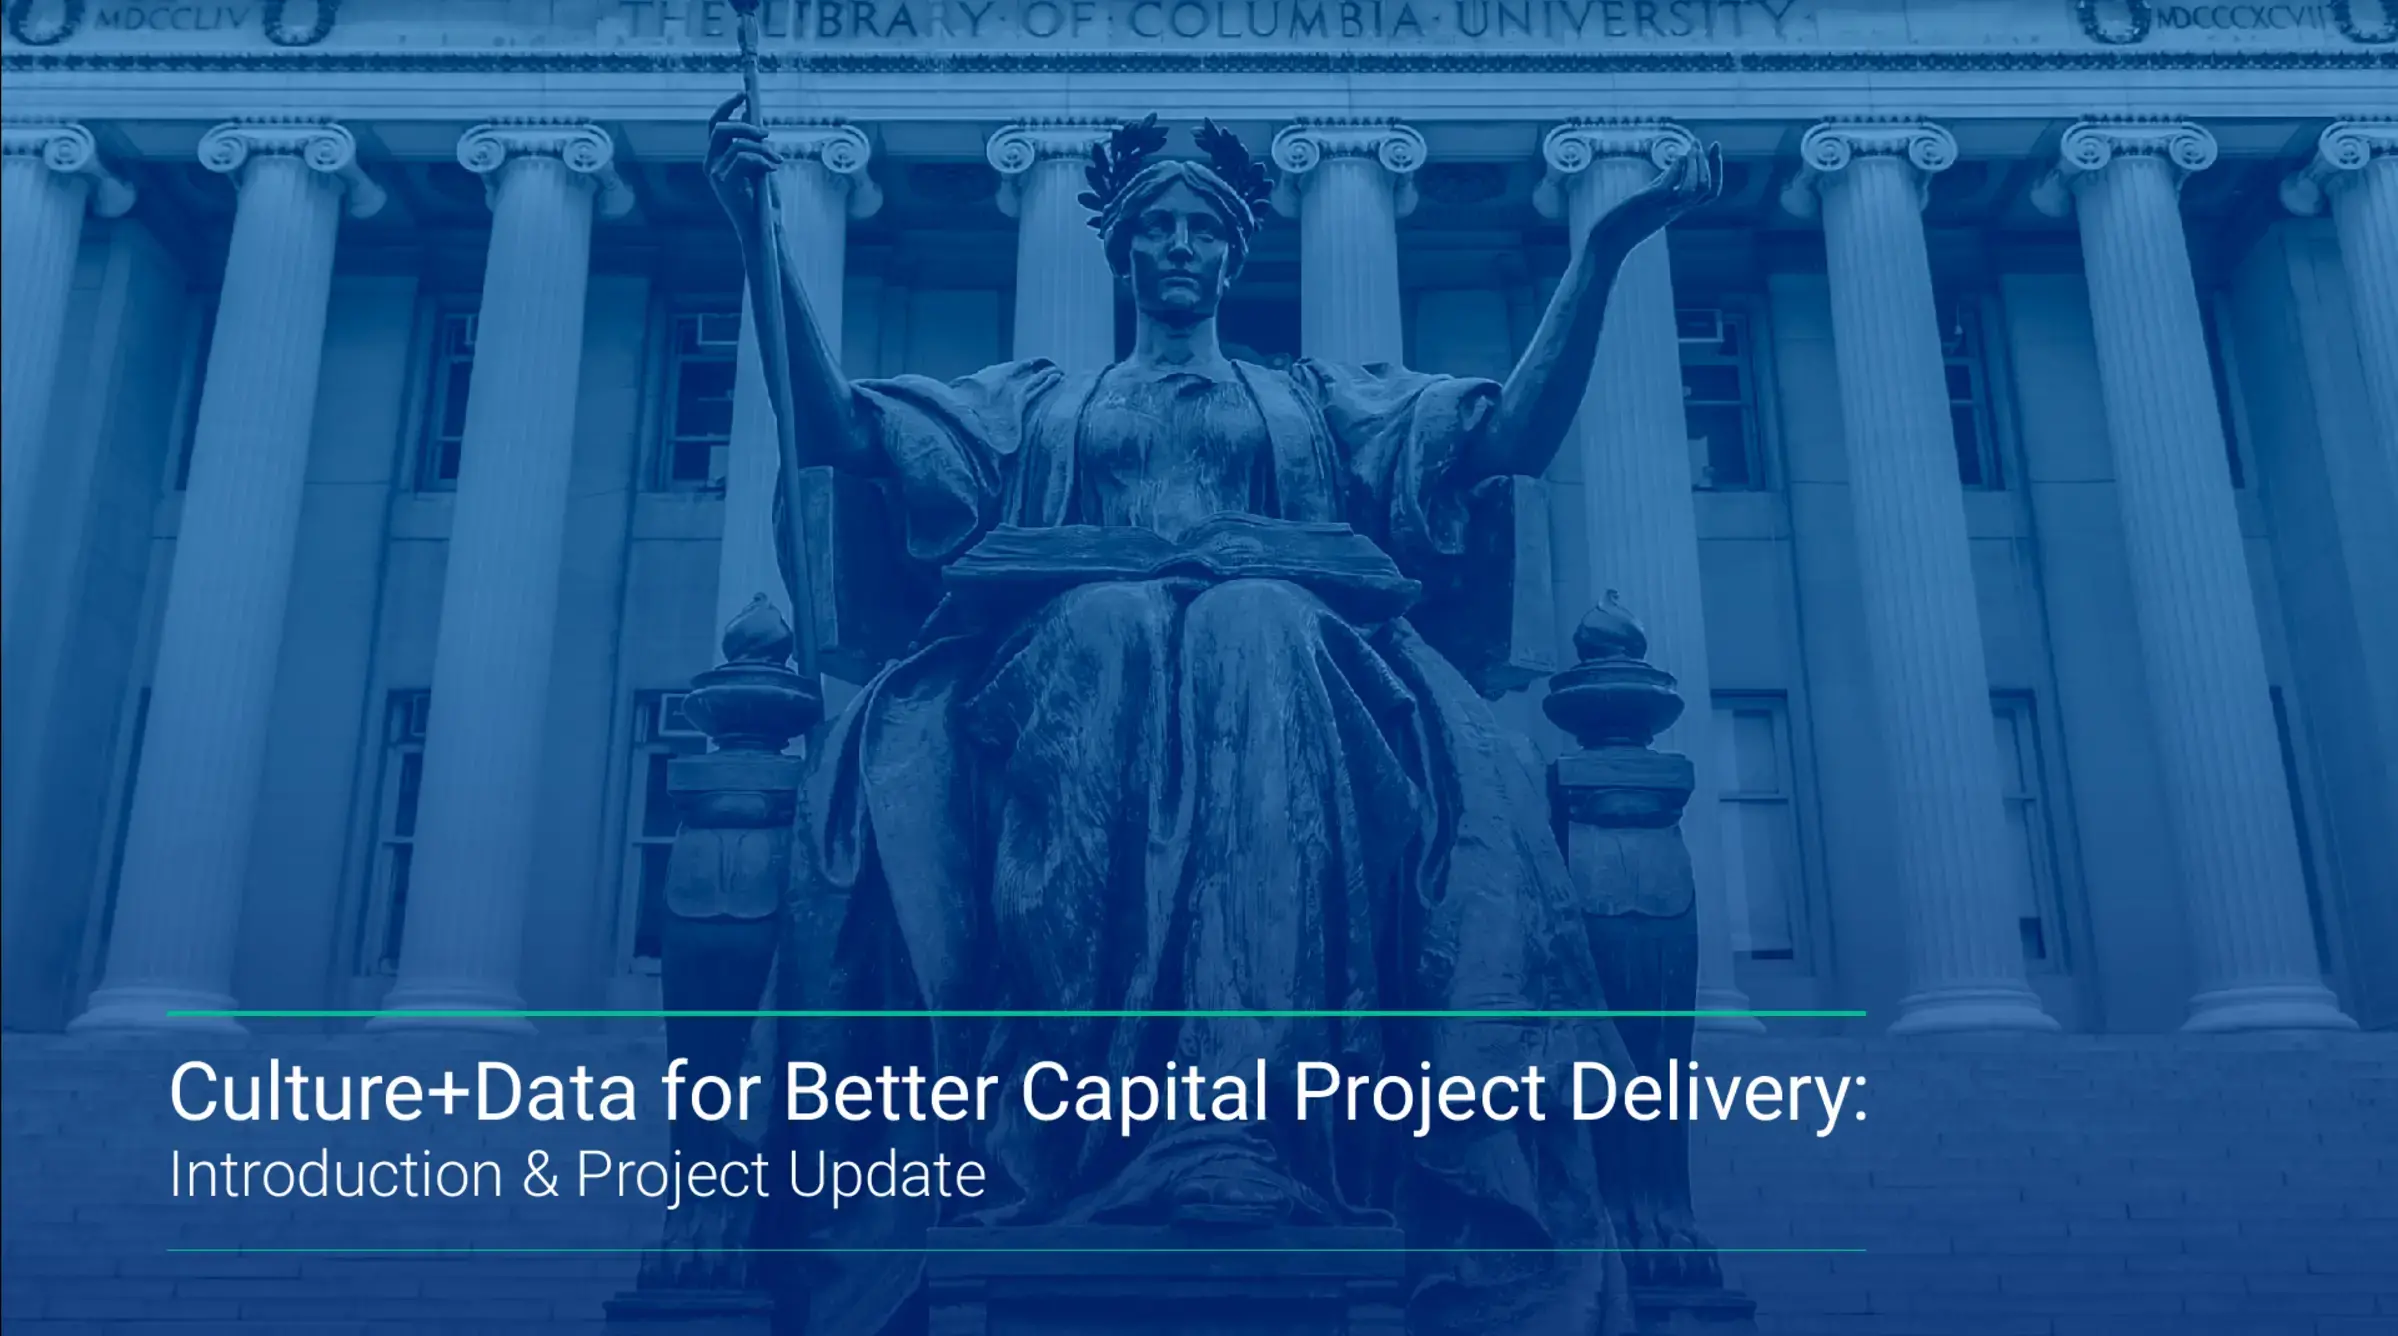 A cover image for a video recording of "Culture+Data for Better Capital Project Delivery – Introduction & Project Update."